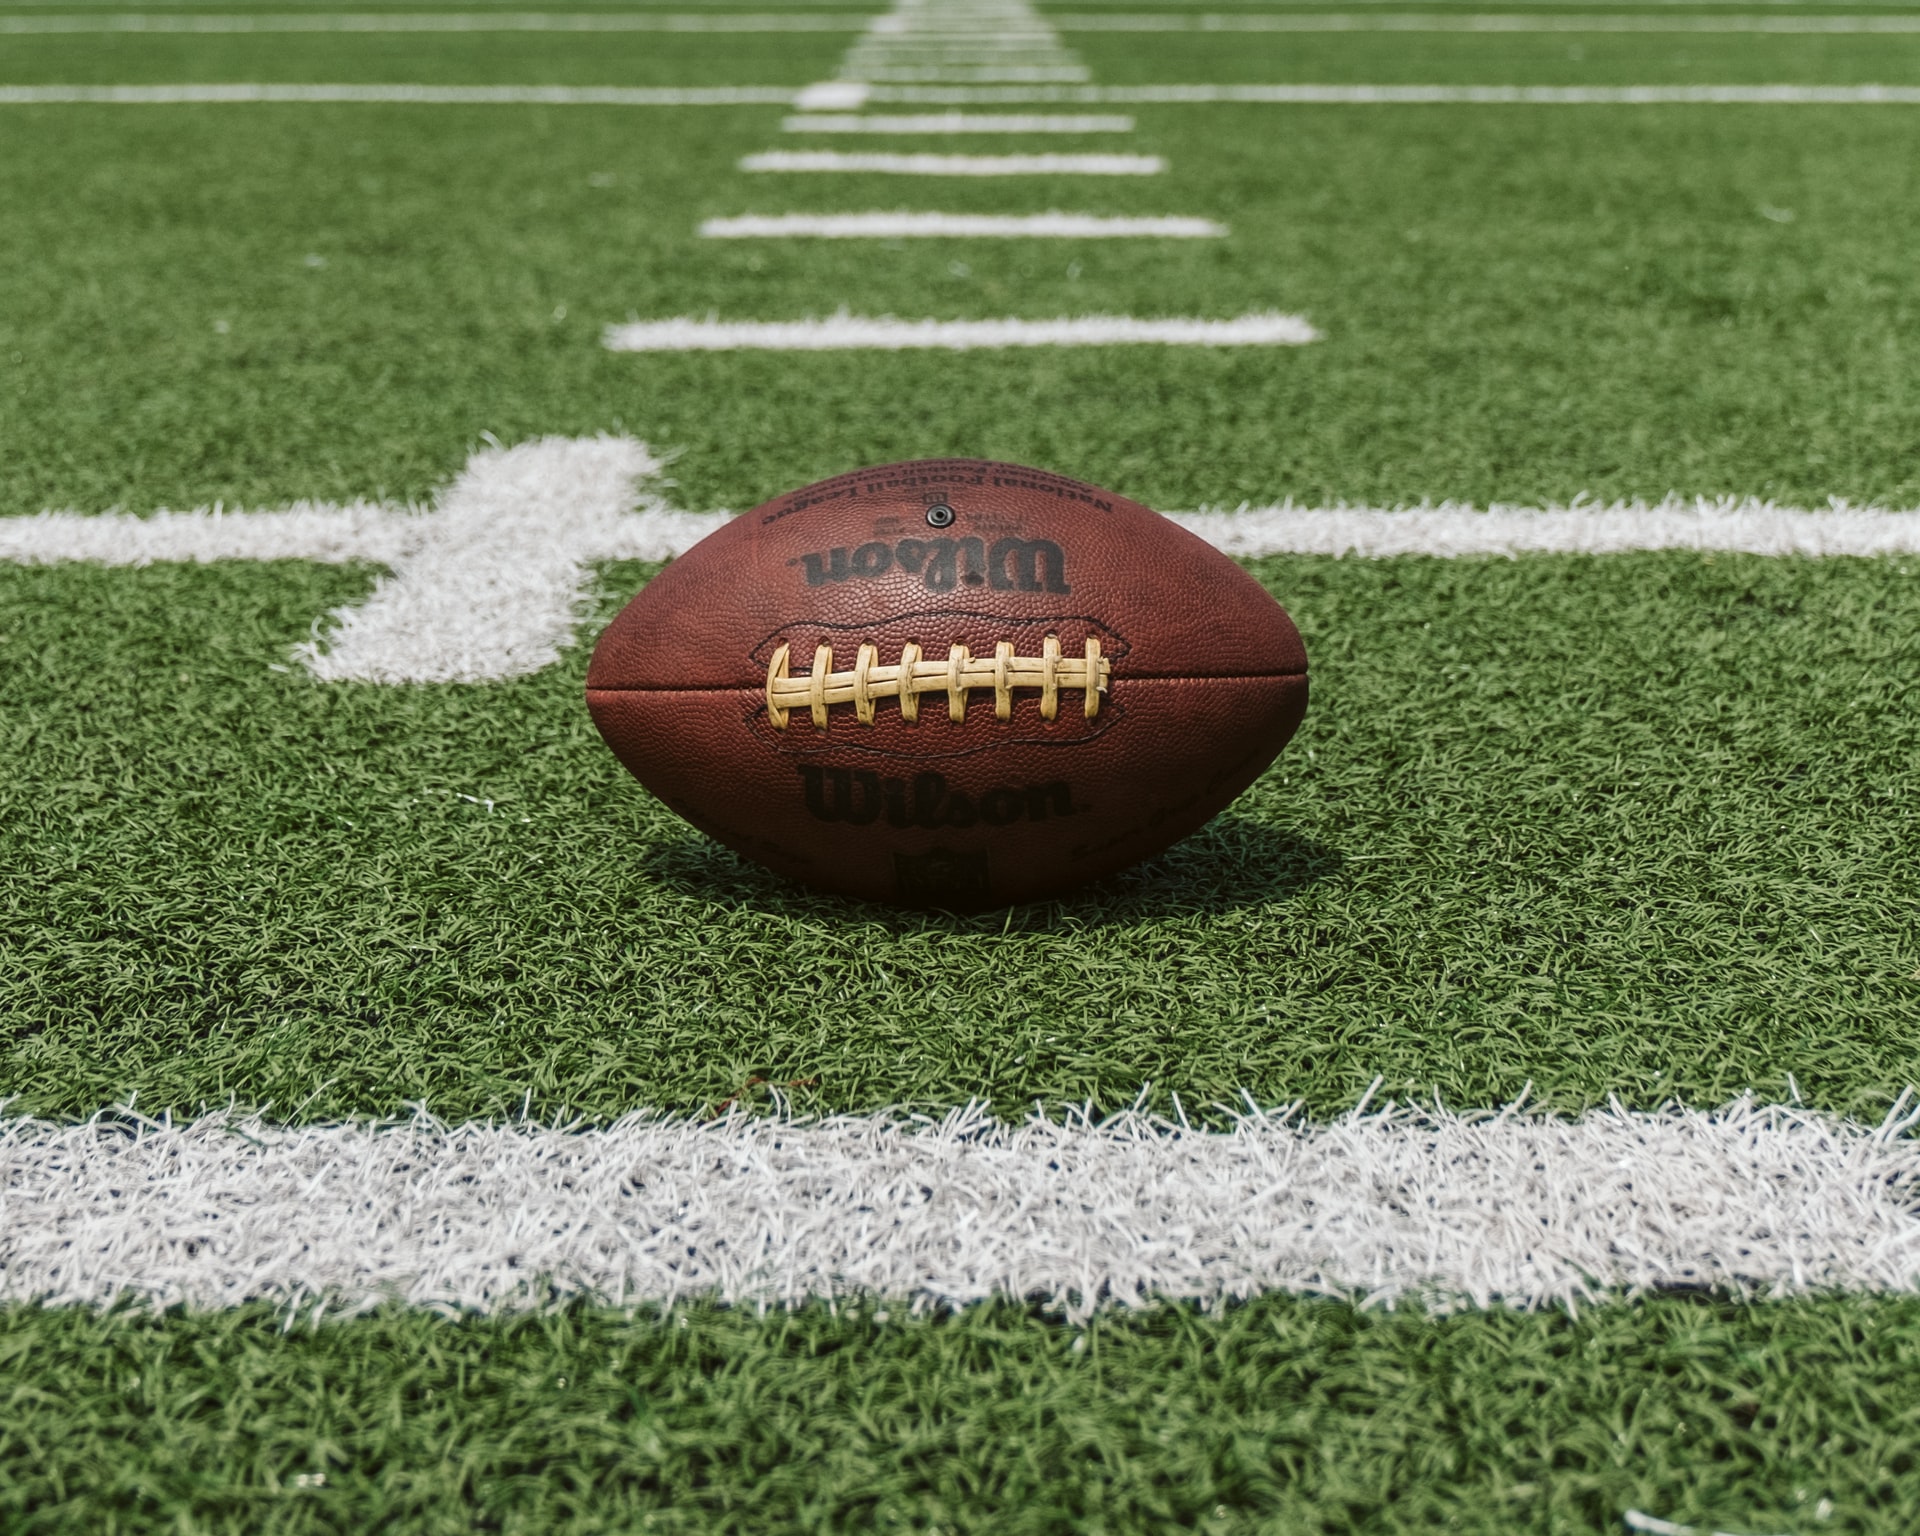 A picture of a football on a football field used by many athletes as they grow and develop useful life skills